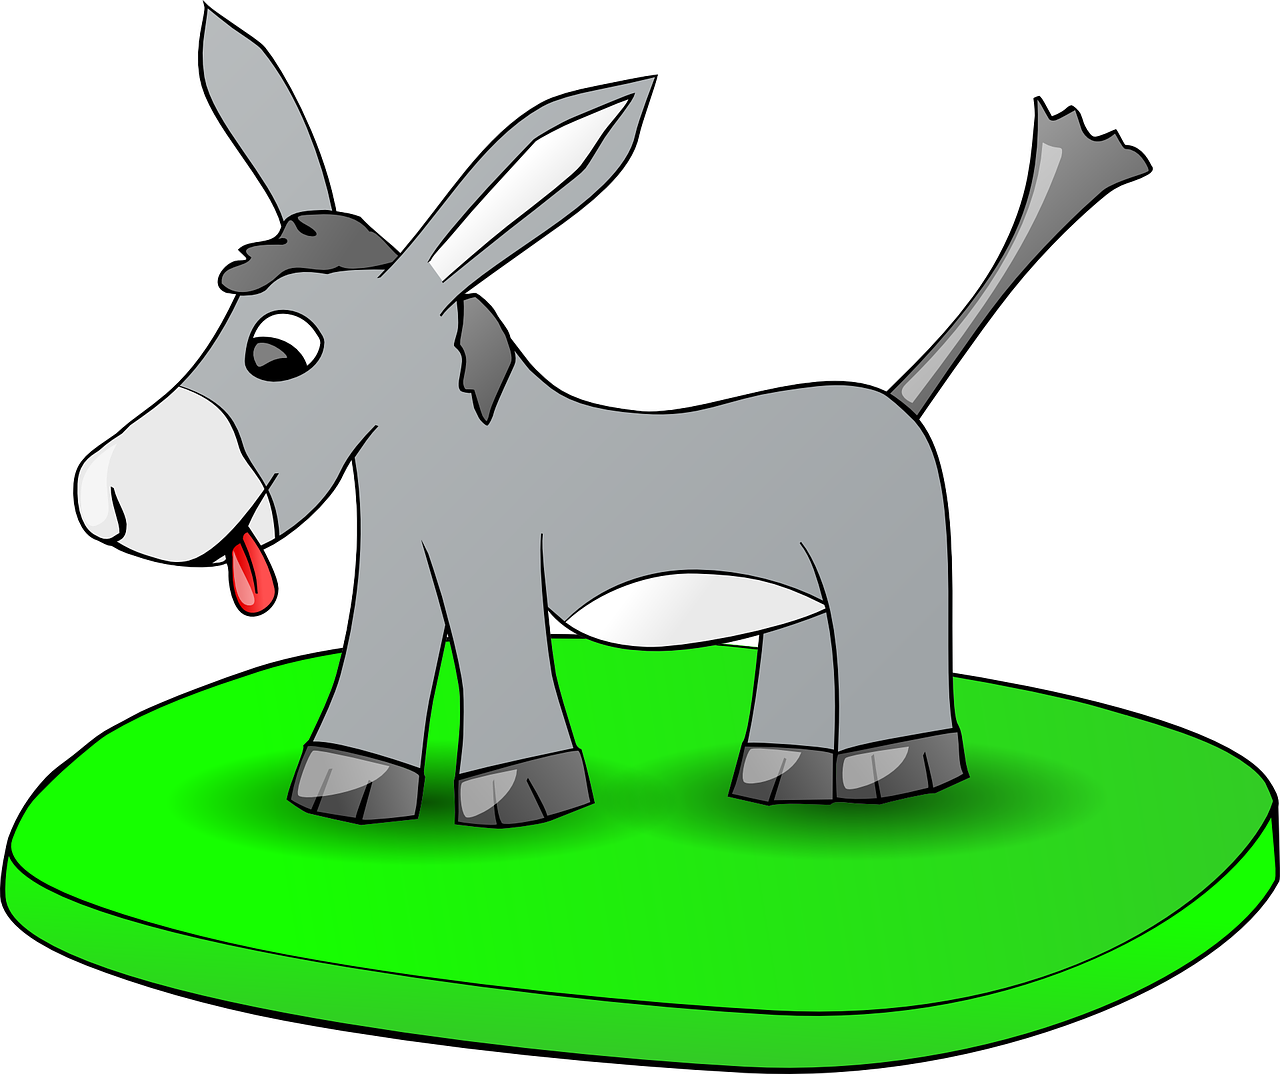 donkey,grey,animal,mammal,green,ground,farm,field,domesticated,grass,pet,free vector graphics,free pictures, free photos, free images, royalty free, free illustrations, public domain